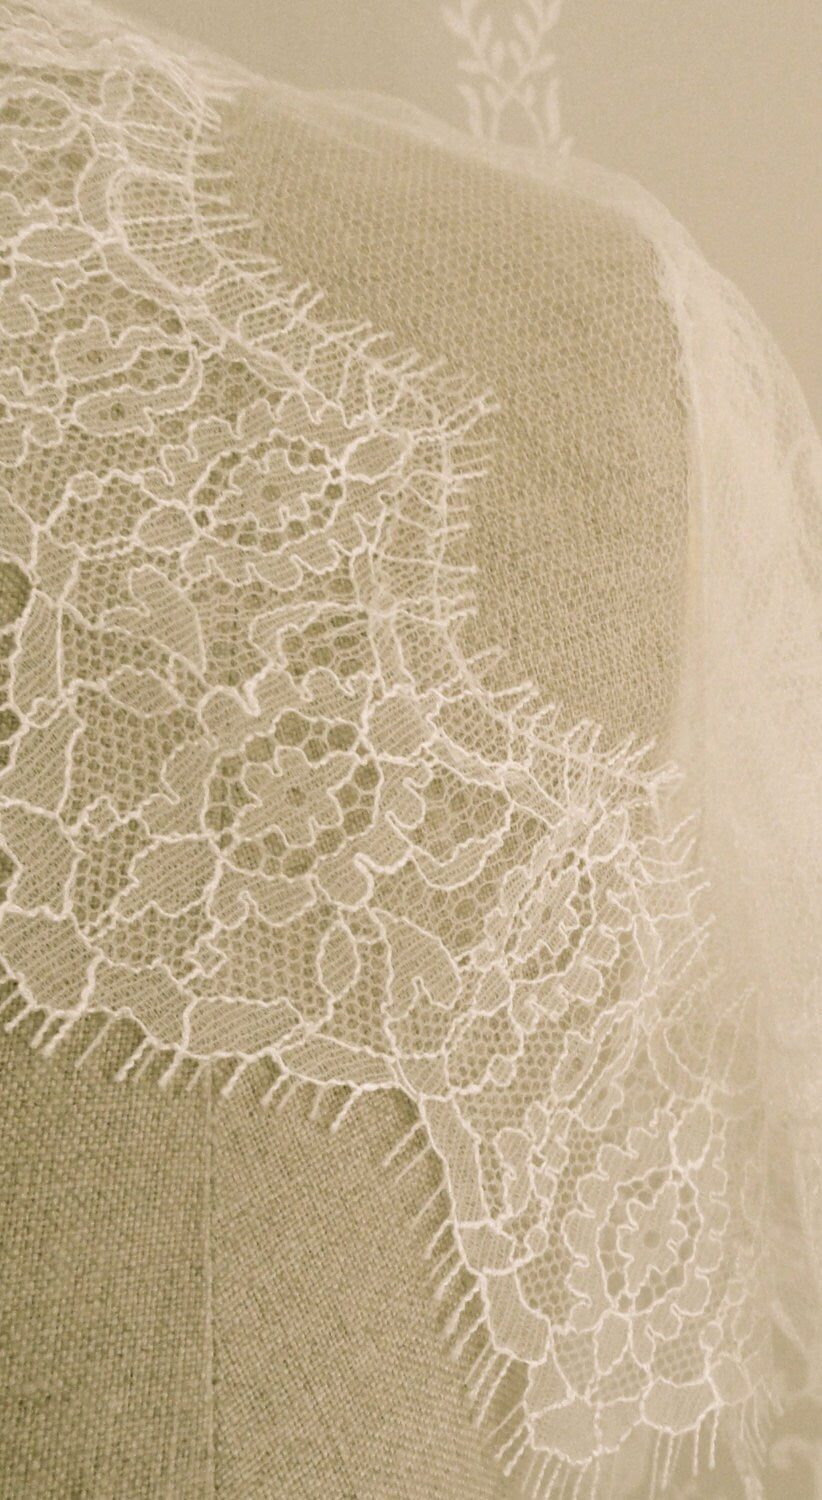 Chantilly lace wedding veils, Truro, Cornwall handmade in the UK